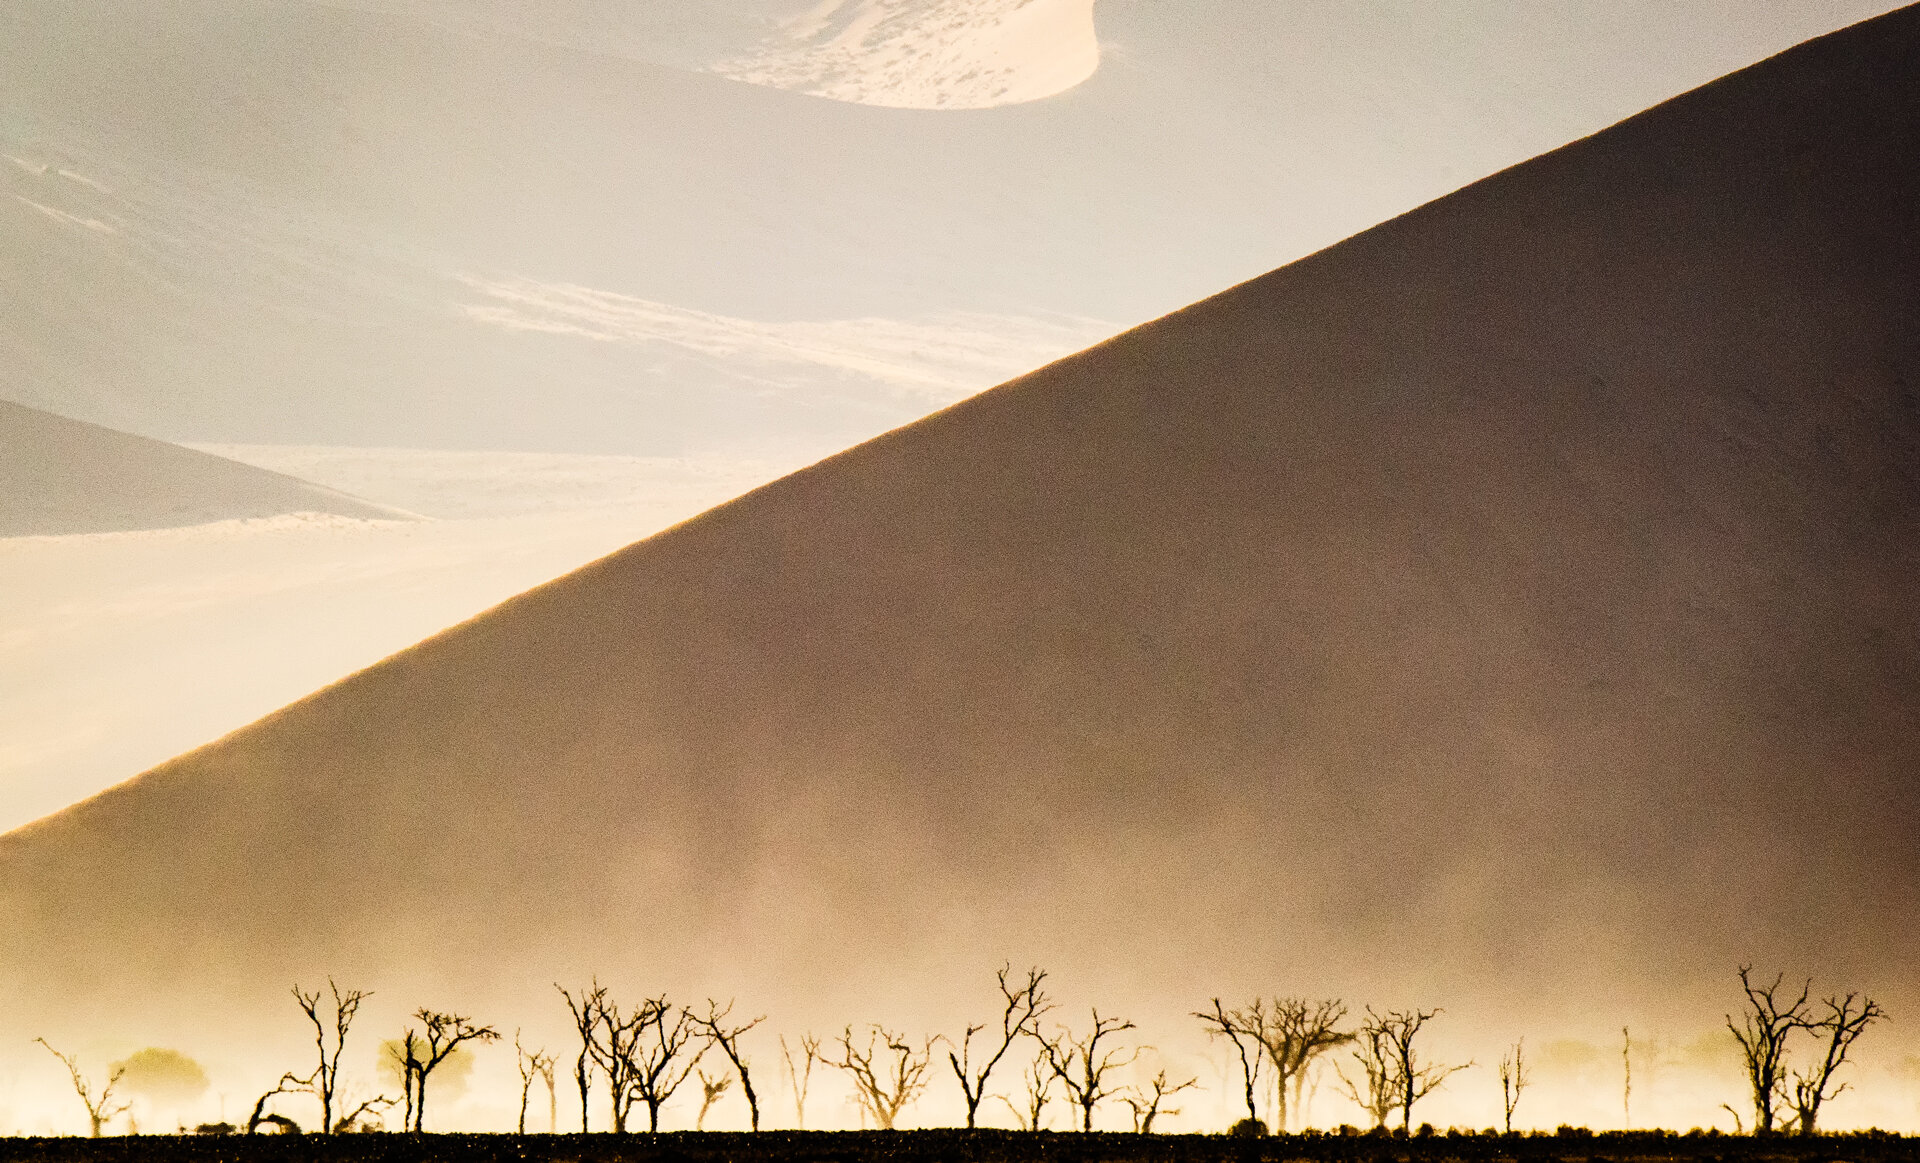   Paul Murray  “Sand Fog” 22.5” x 29.5” x 1”; Color photographic image print on archival paper $995. 